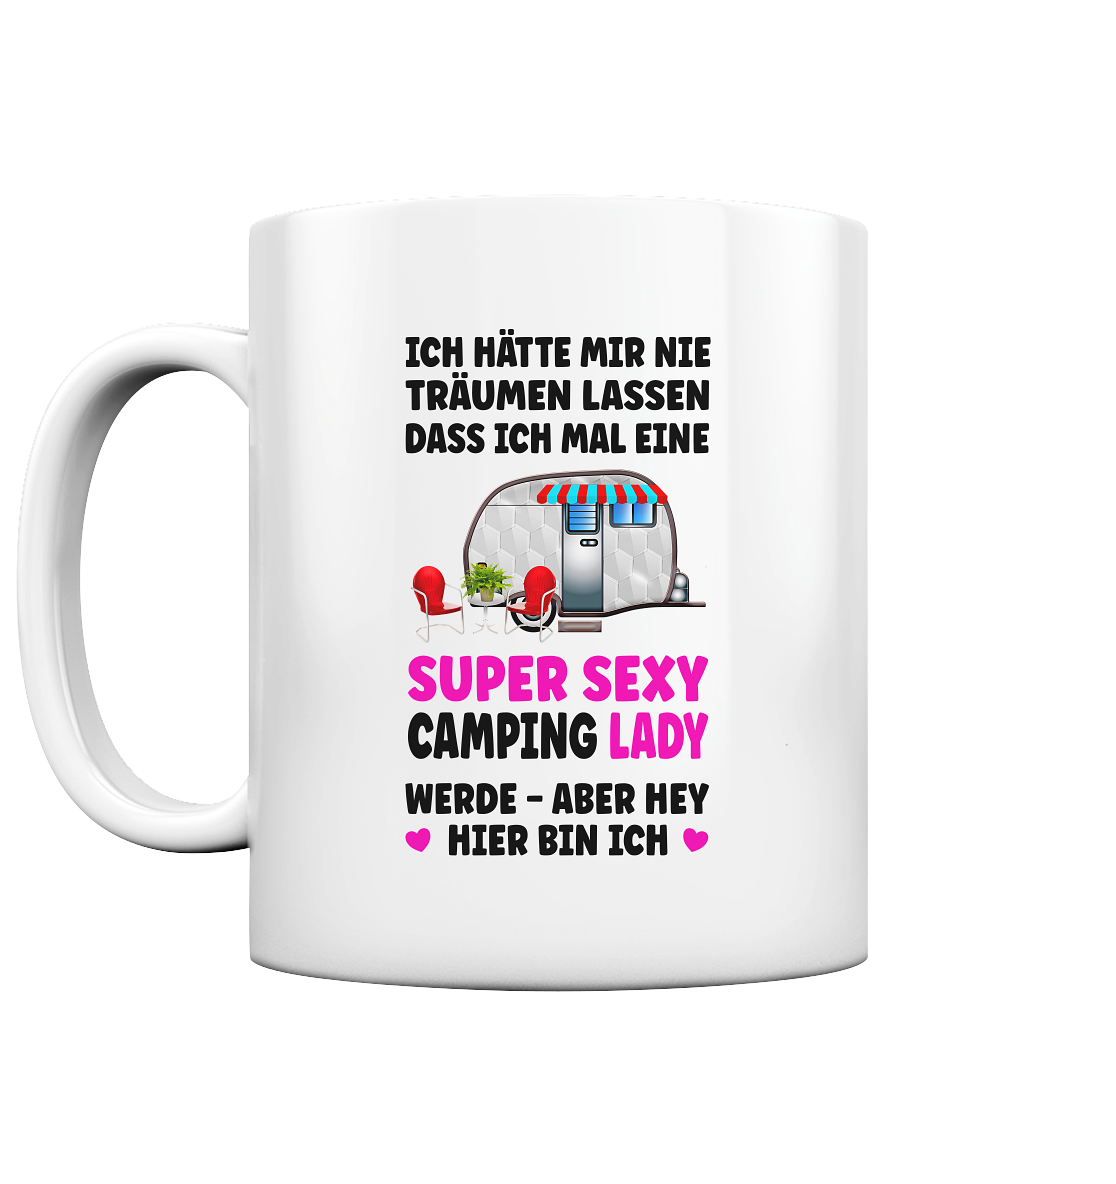 Super Sexy Camping Lady - Tasse glossy